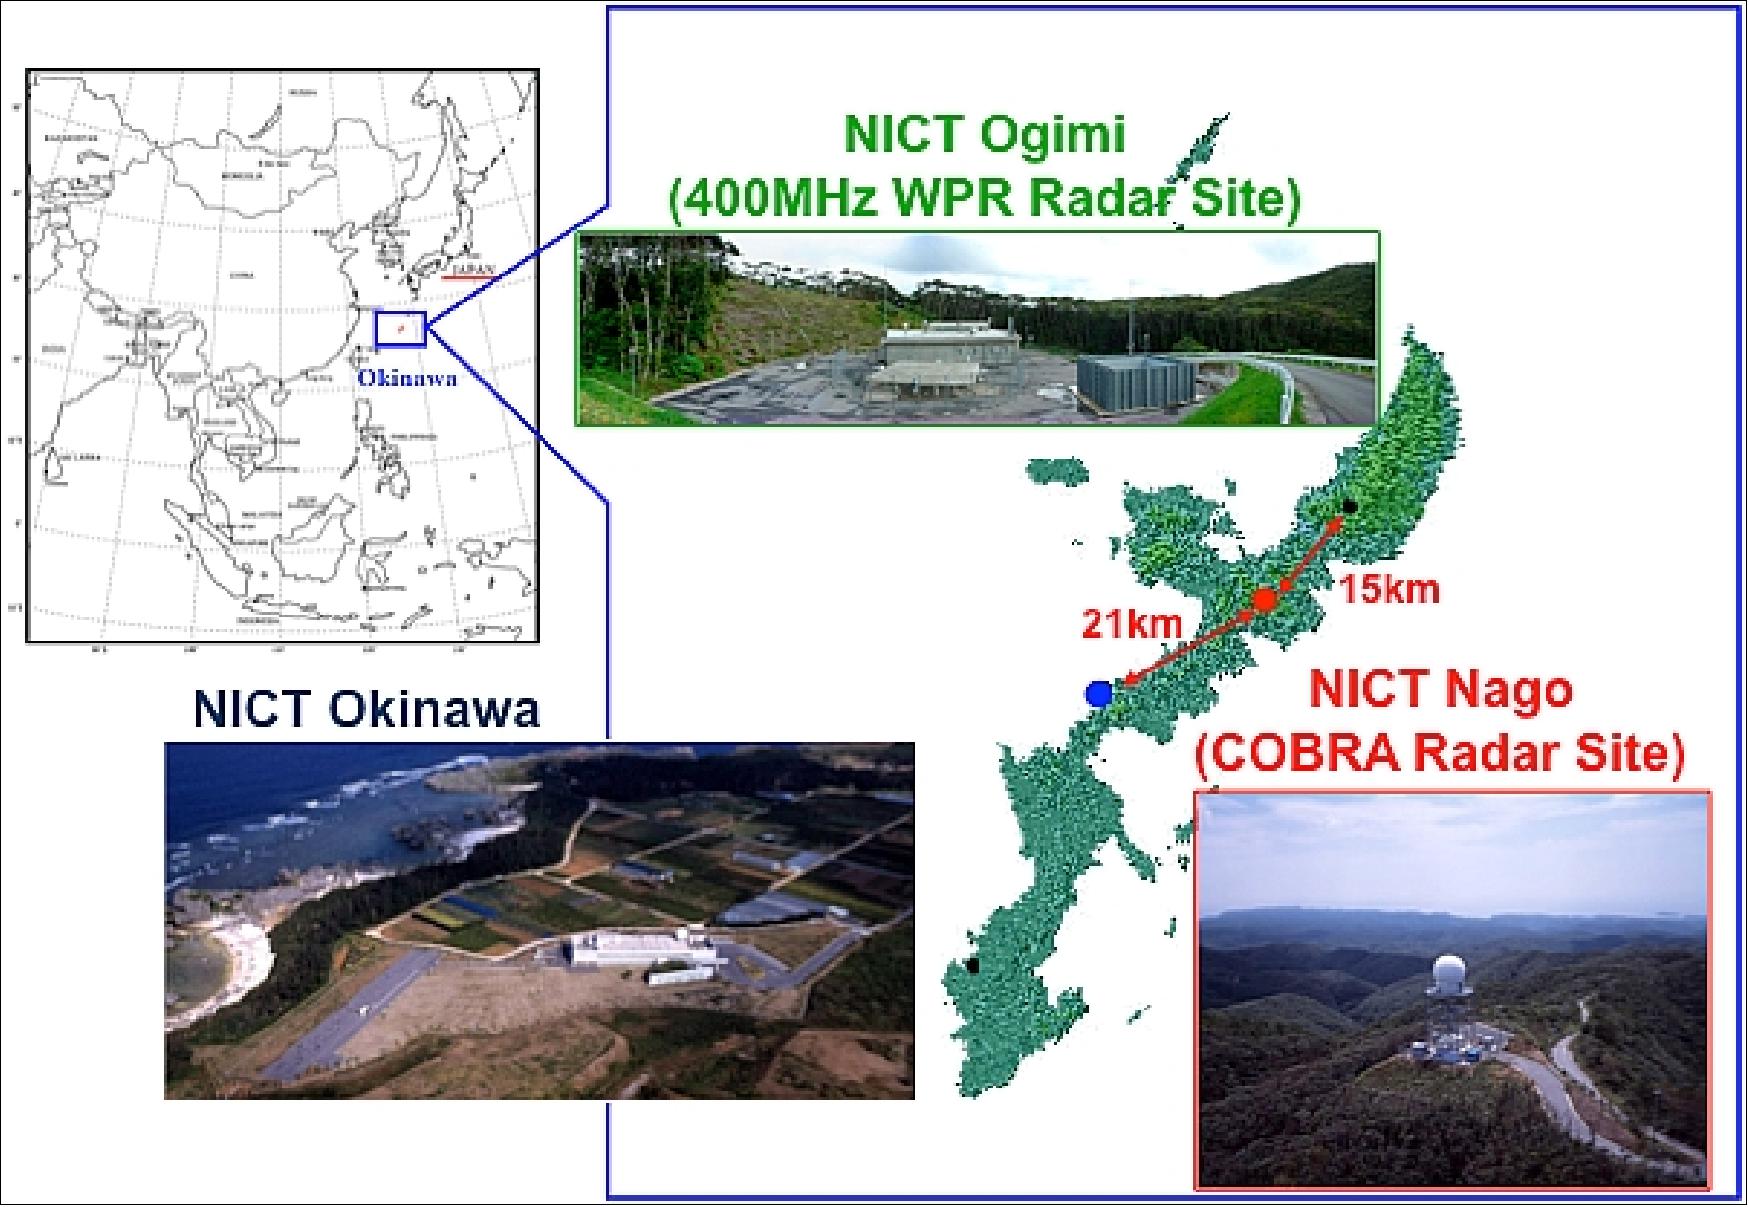 Figure 85: Site locations of the ground validation site in Okinawa (image credit: NICT)